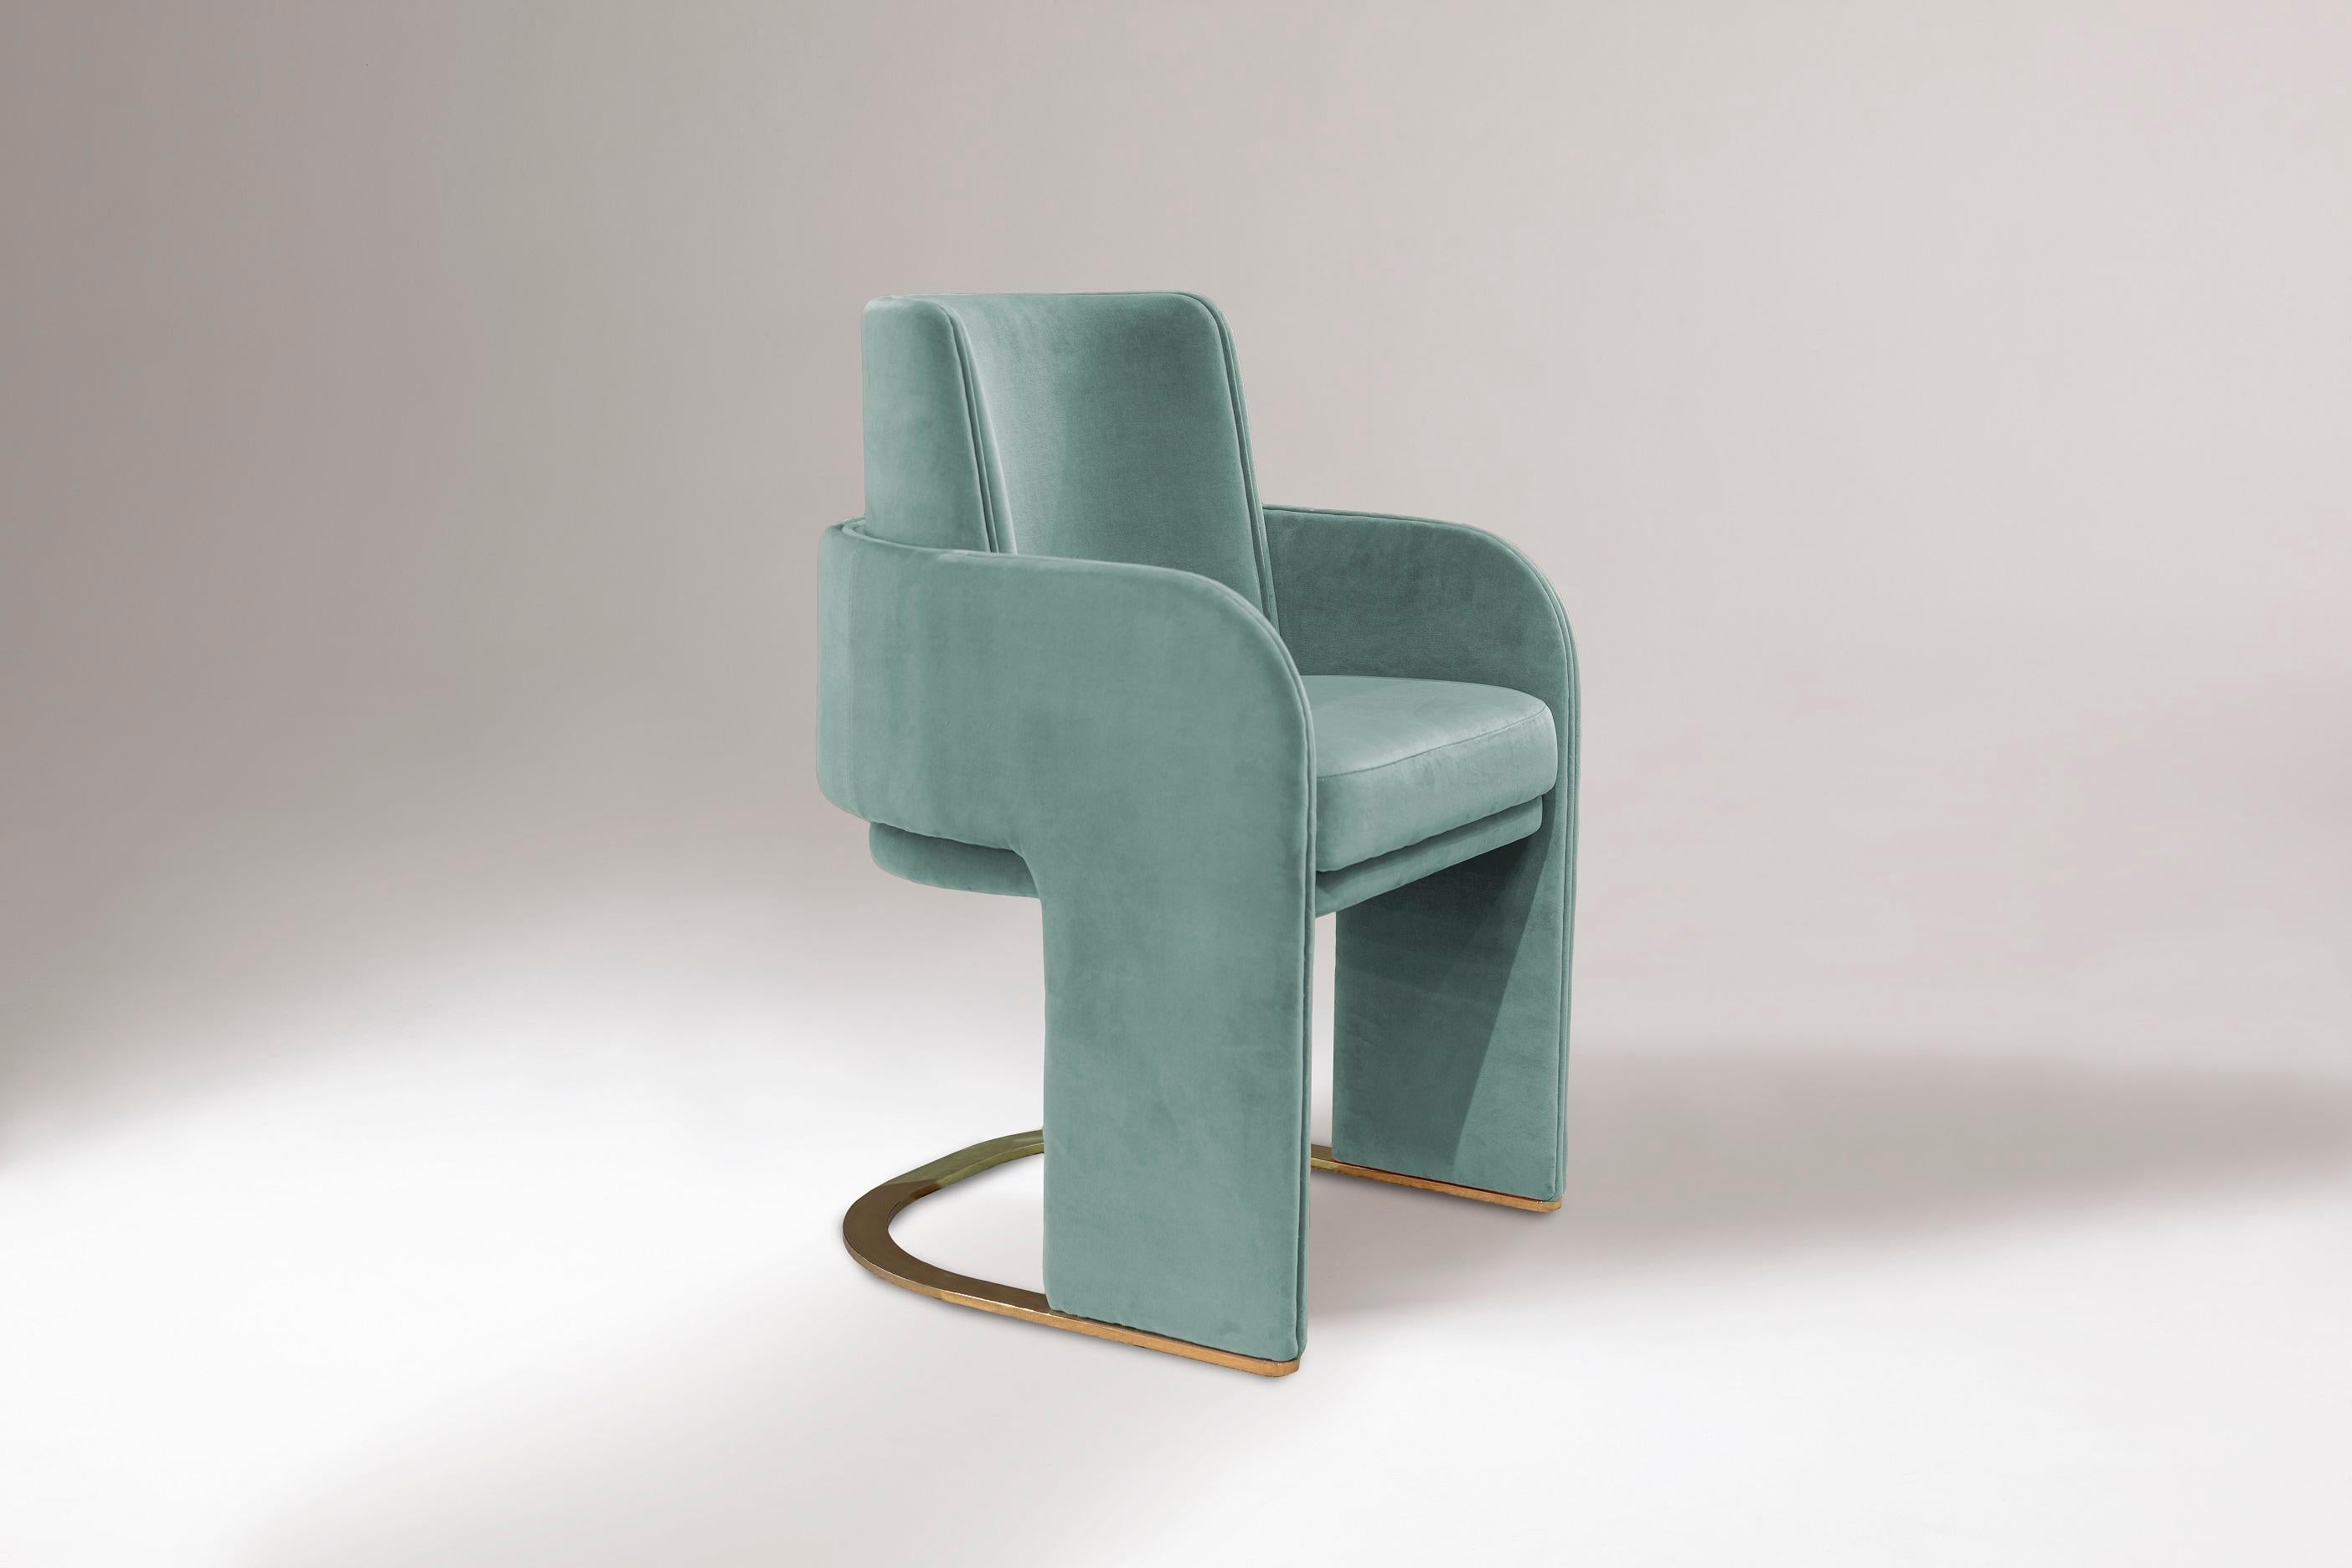 Odisseia chair embodies the aesthetic spirit of the Space Age, a new kind of discreet luxury and comfort inspired by a futuristic era created by new visual experiences and concepts of the future. This effortless but striking piece insinuates a luxe